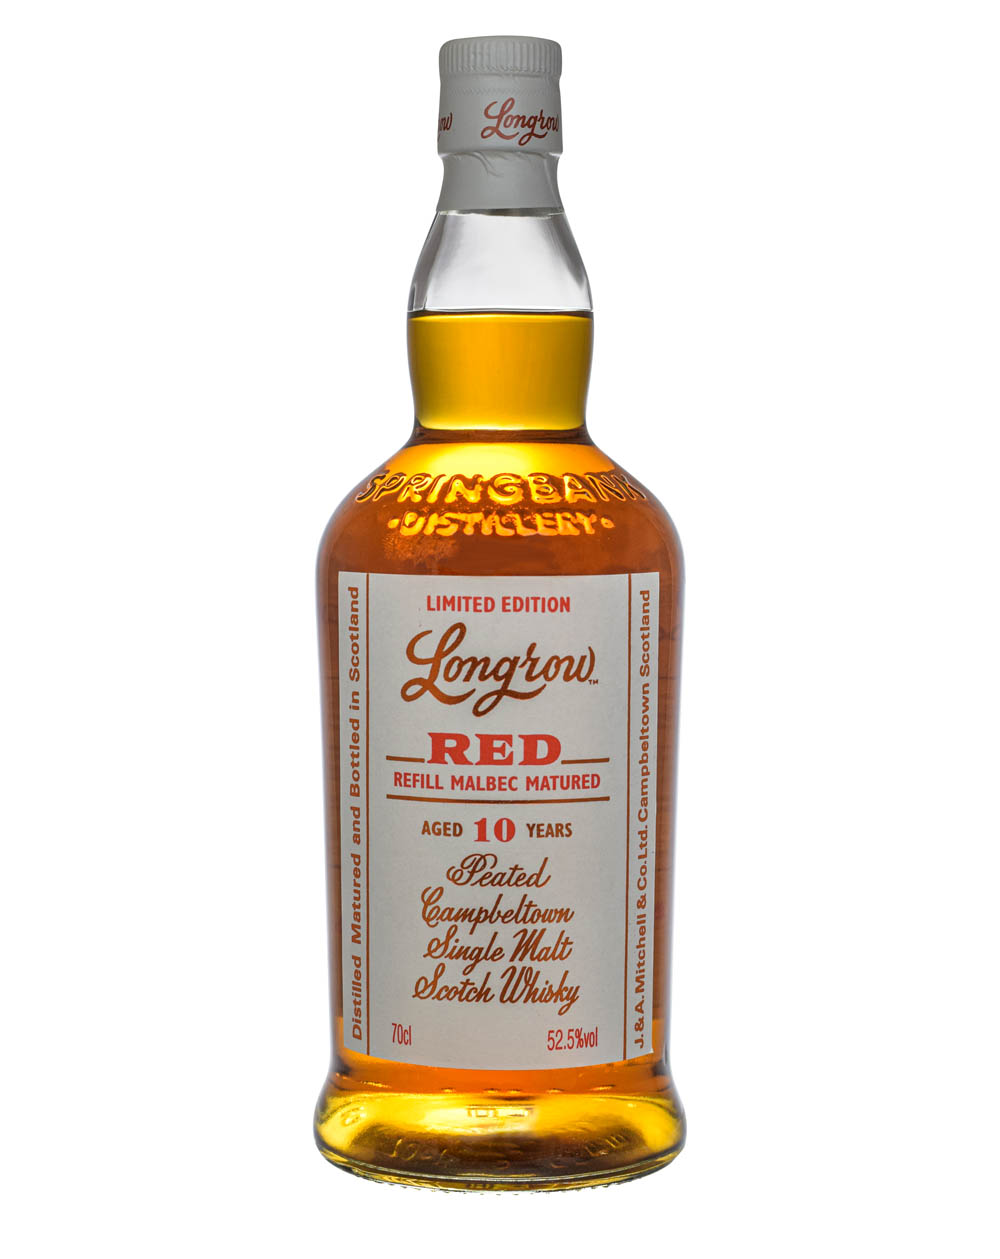 Longrow Red Refill Malbec Matured 10 Years Old Musthave Malts MHM